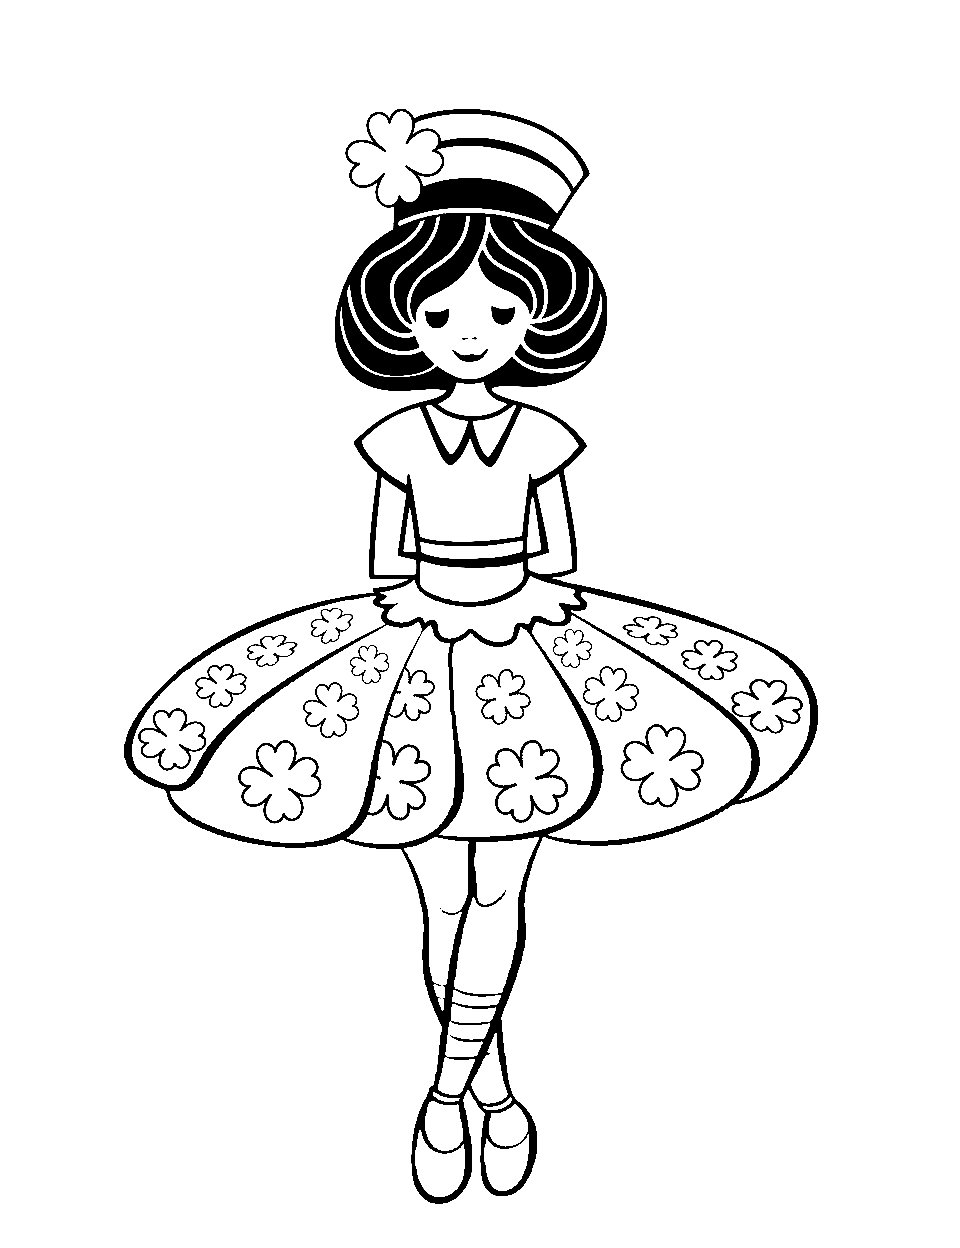 Art of Shamrock Lady Coloring Page - Art of a lady in a flowing skirt patterned with shamrocks.